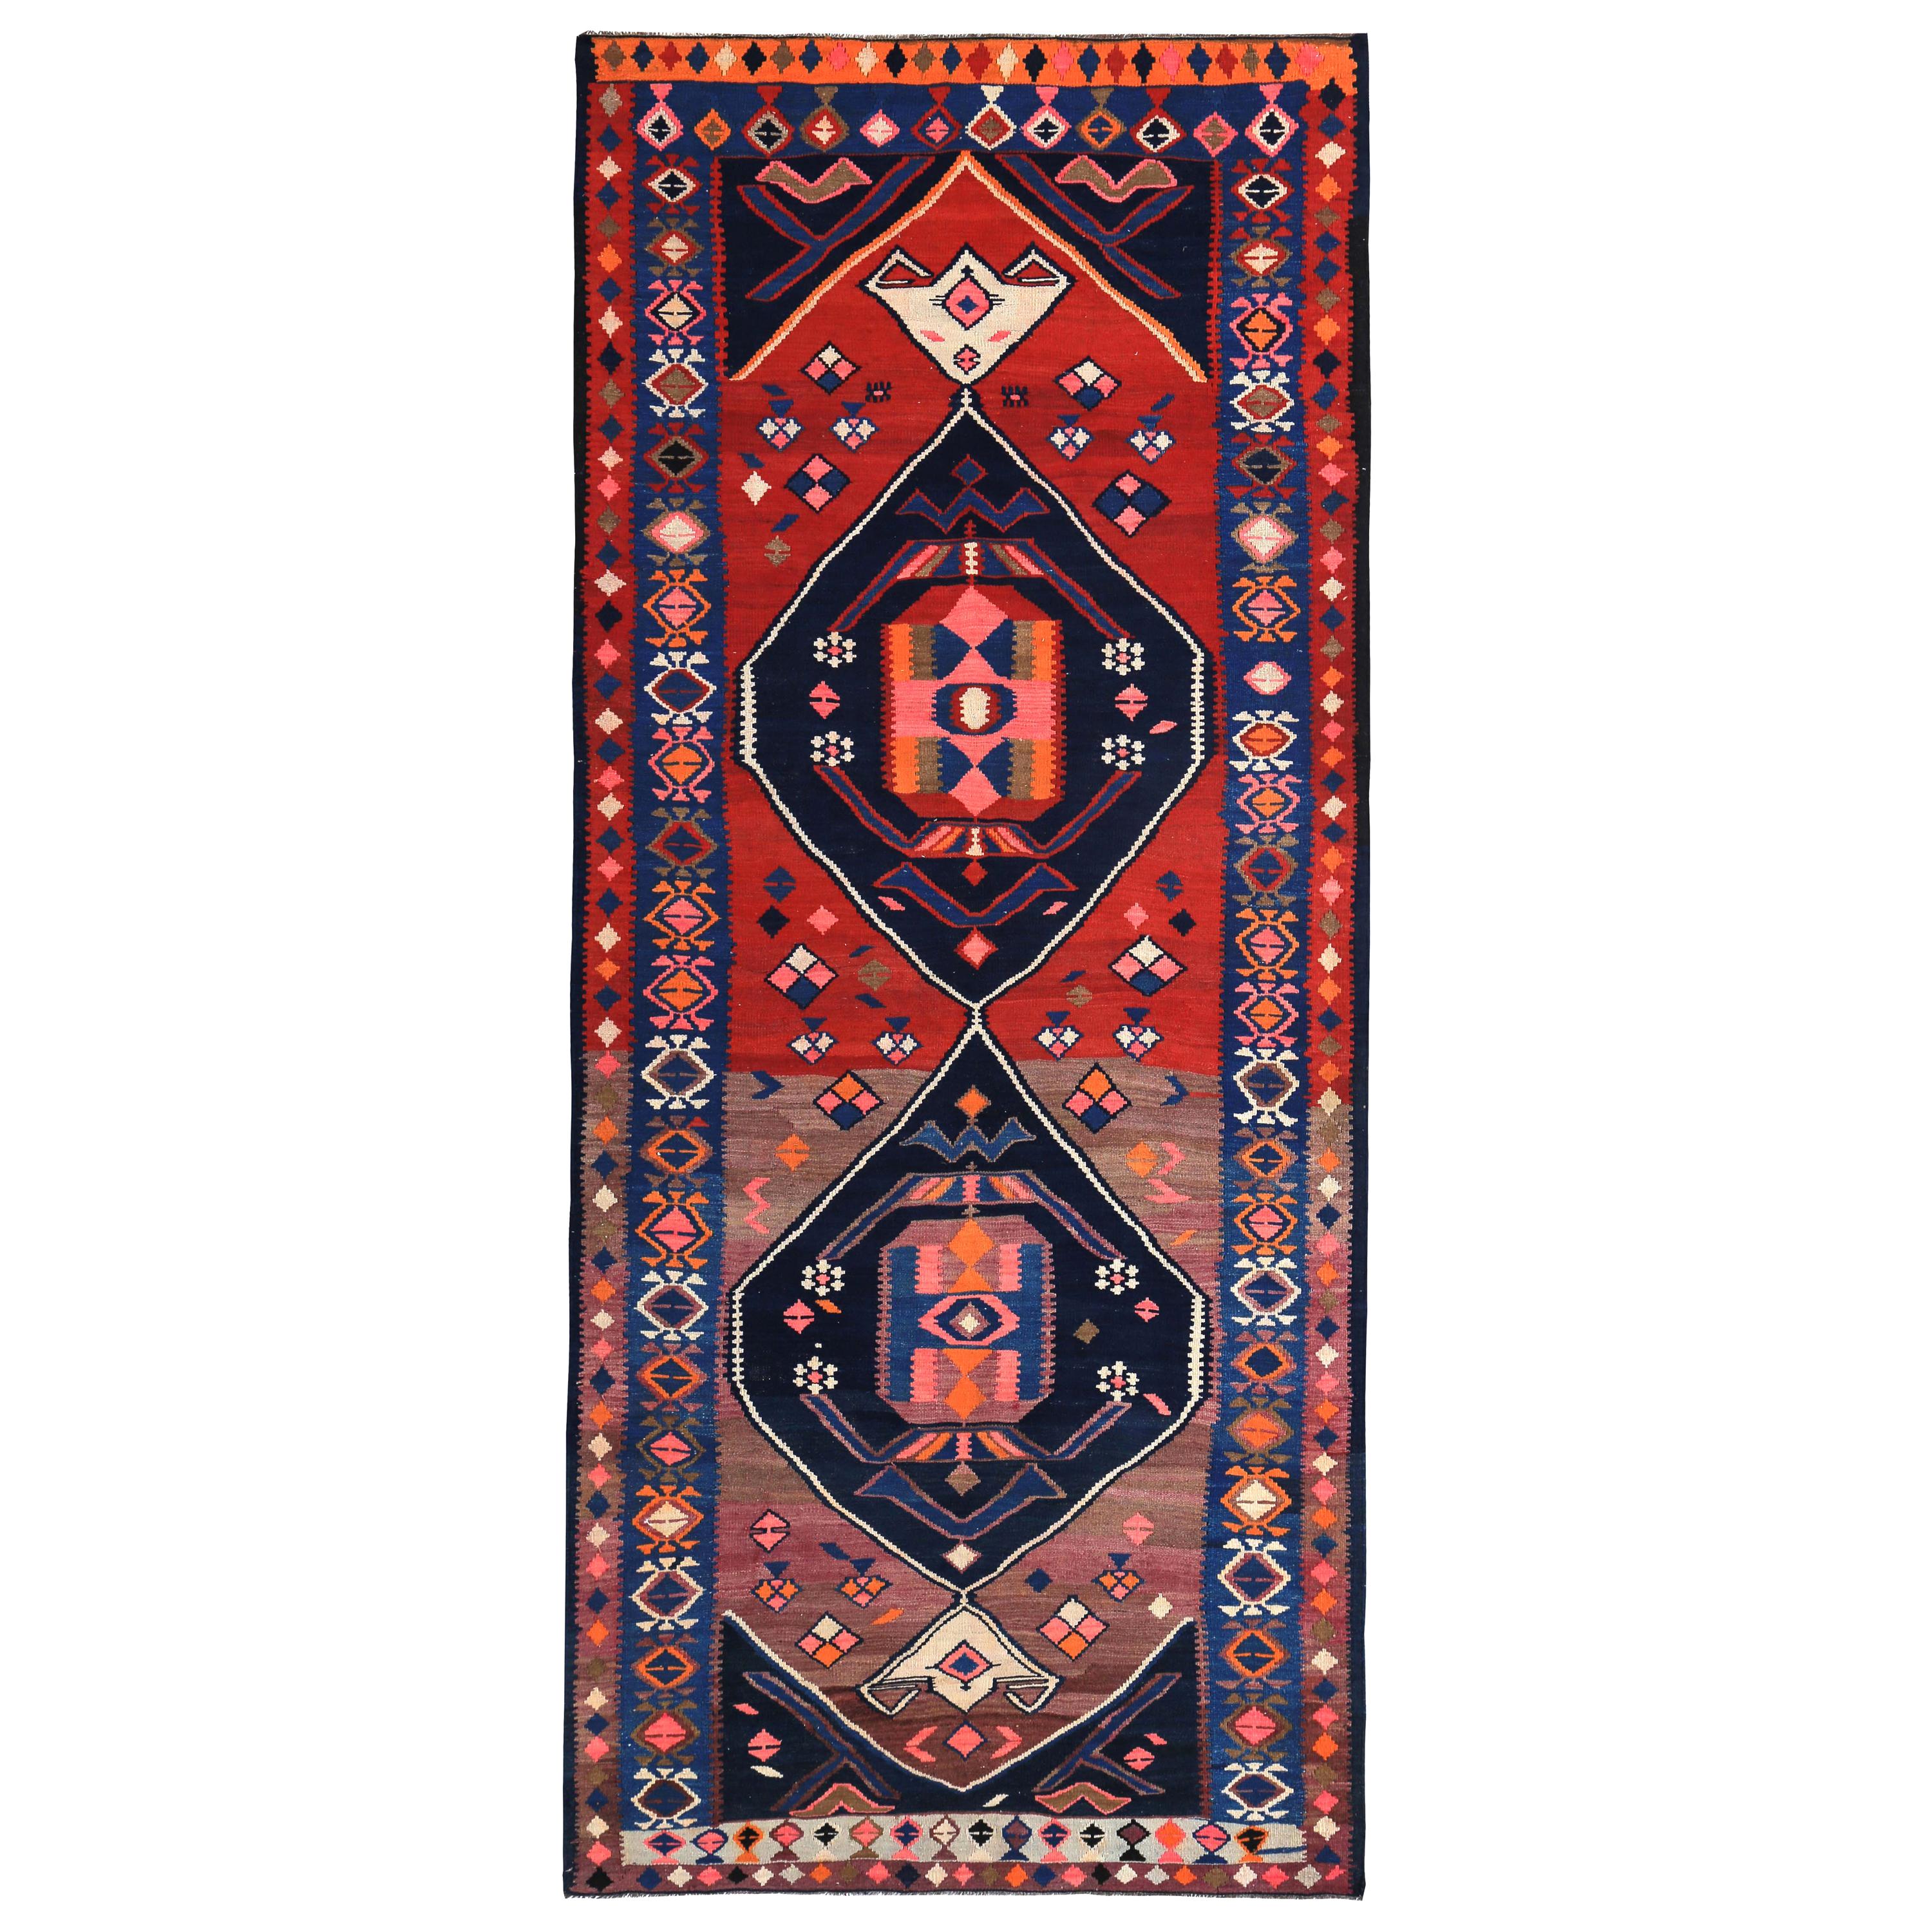 Modern Turkish Kilim Runner Rug with Blue, Red and Pink Tribal Design